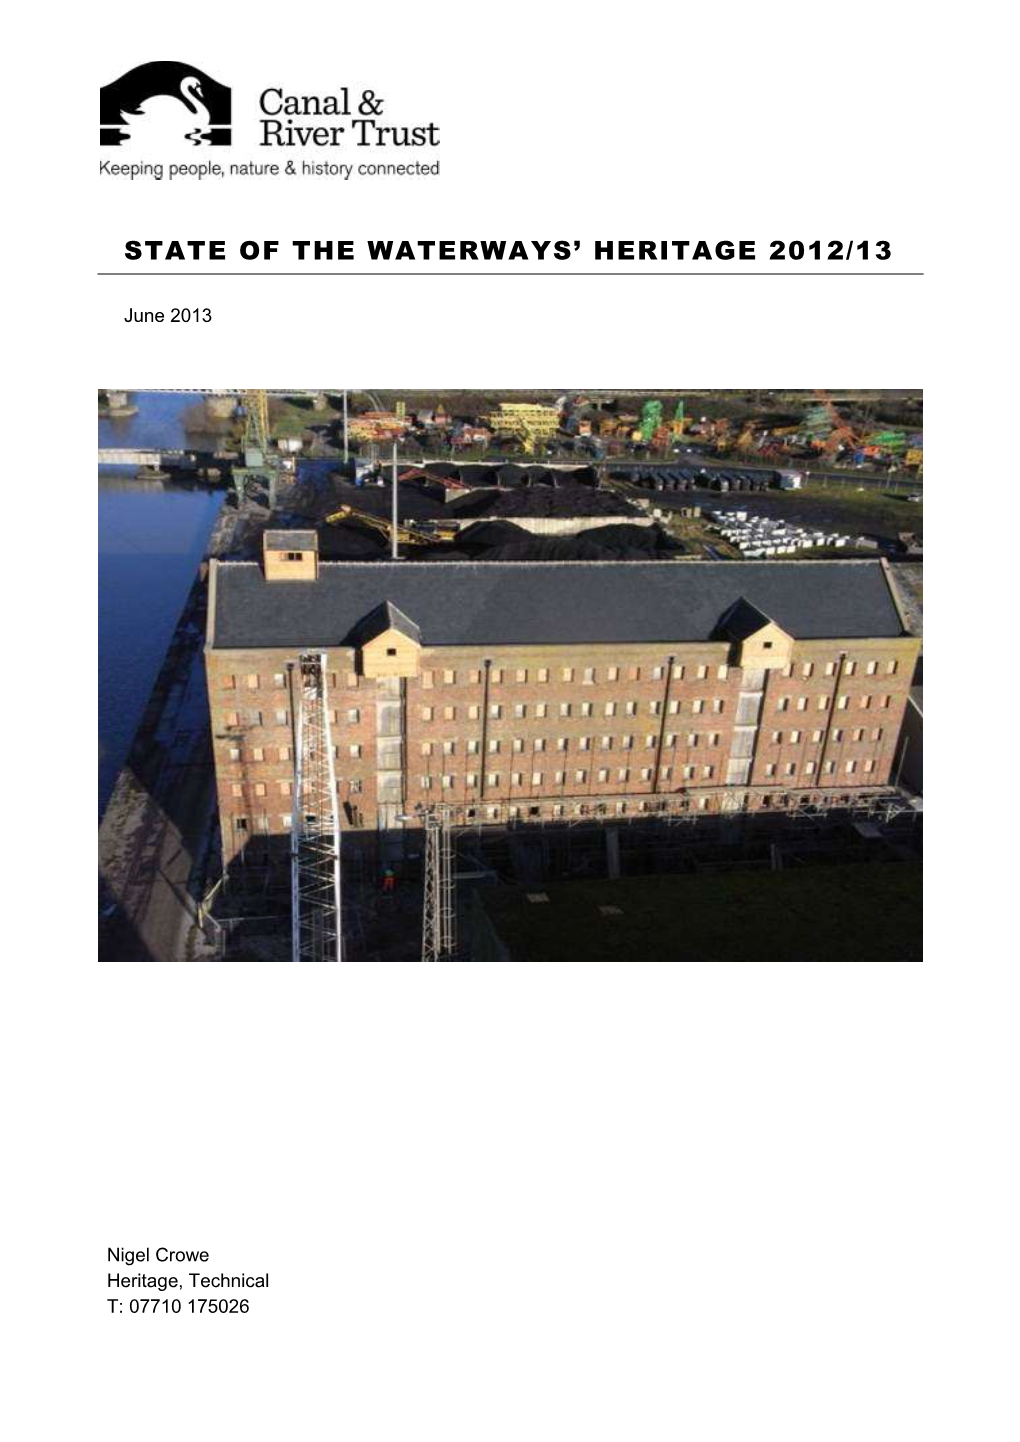 State of the Waterways' Heritage 2012/13